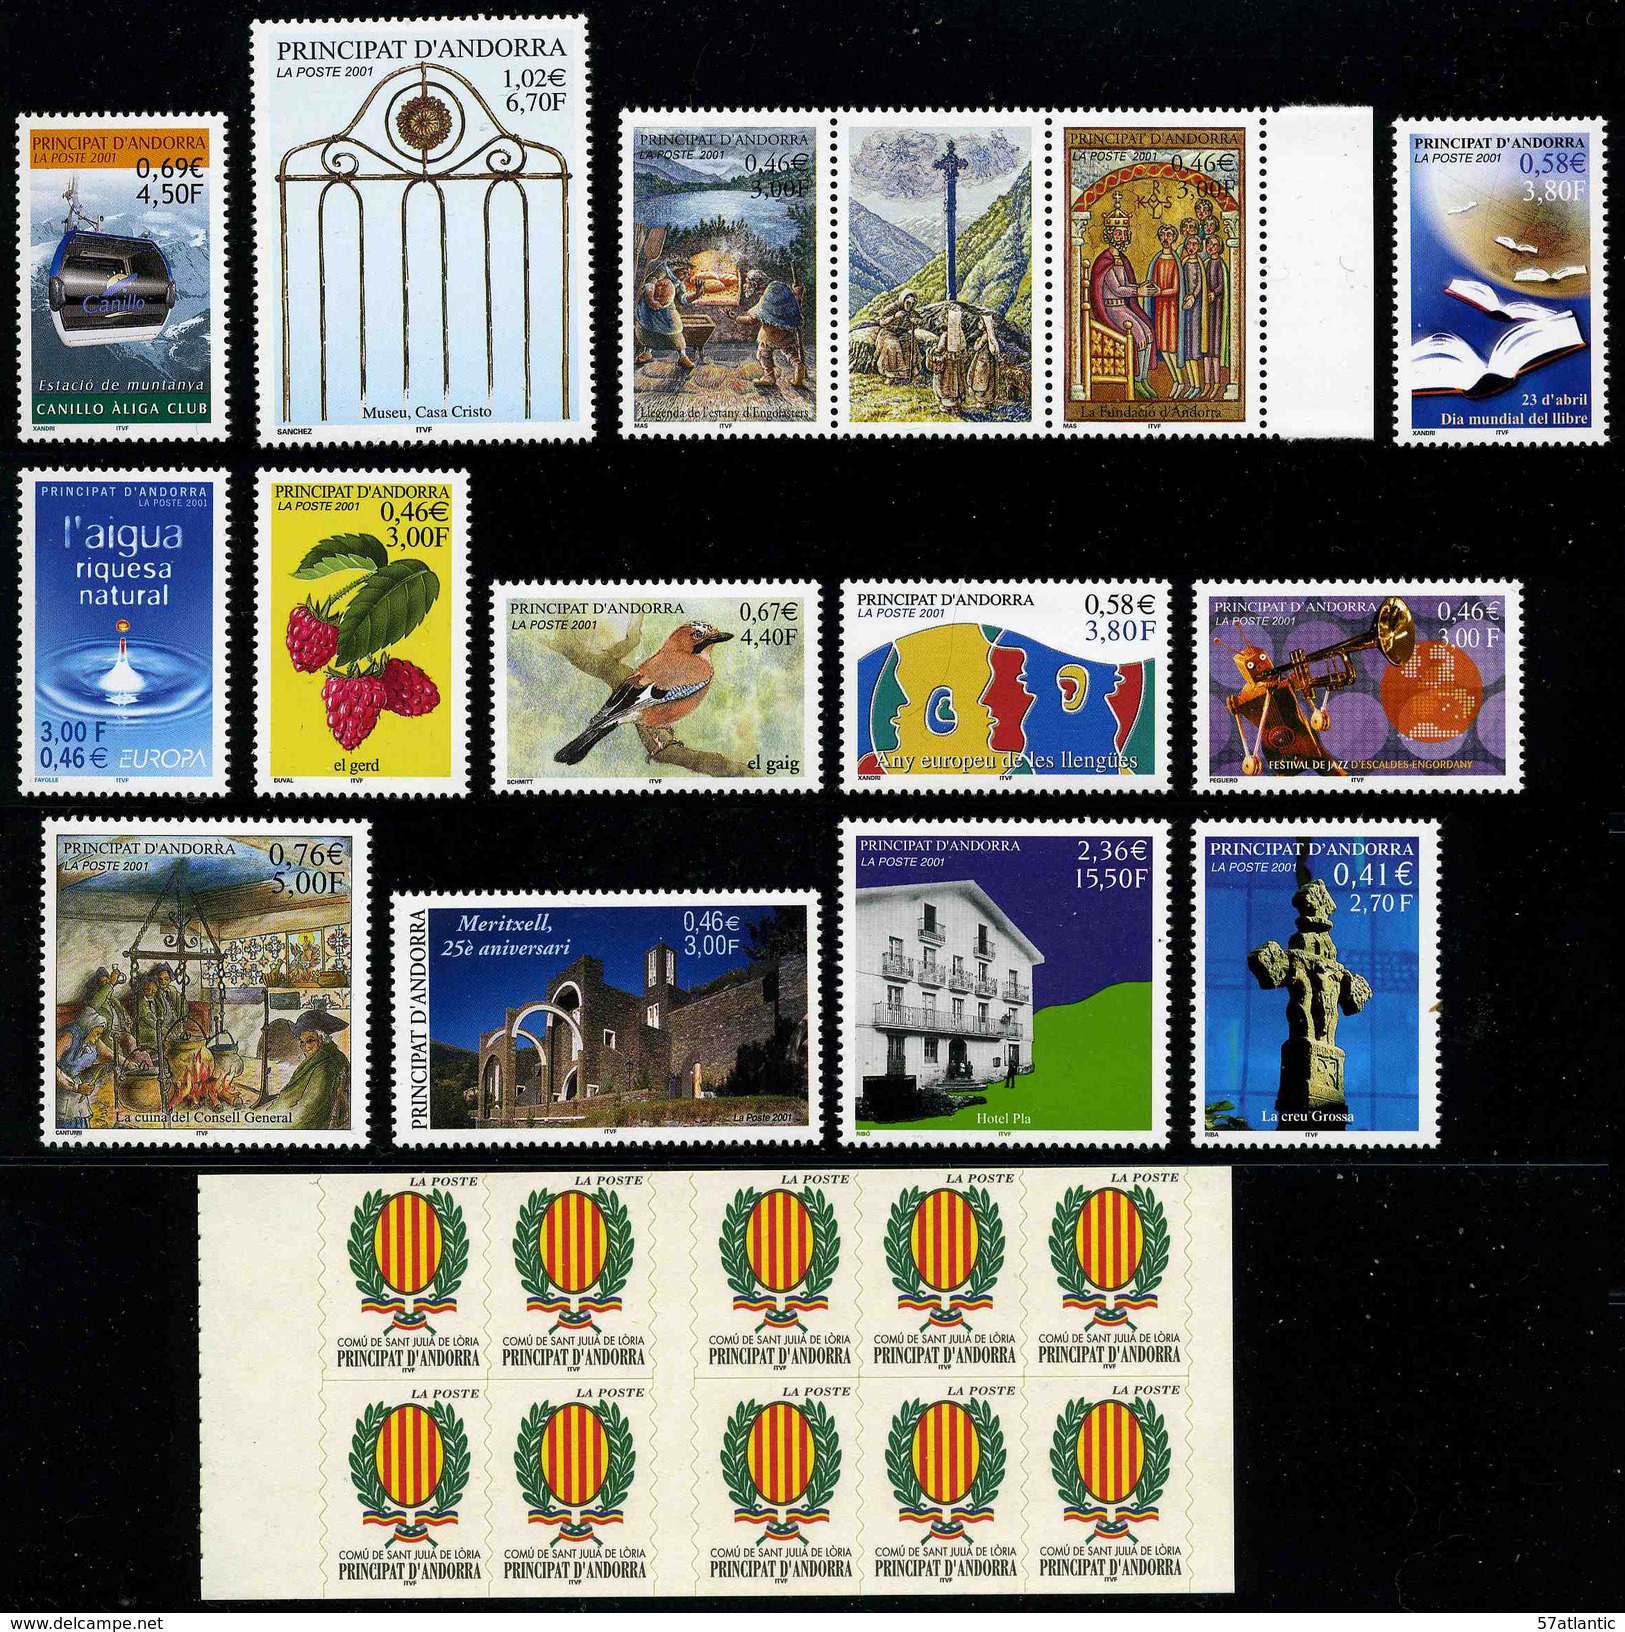 ANDORRE FRANCAIS - ANNEE COMPLETE 2001 - YT 540 à 554 ** + CARNET C11 -  TIMBRES NEUFS ** - Full Years